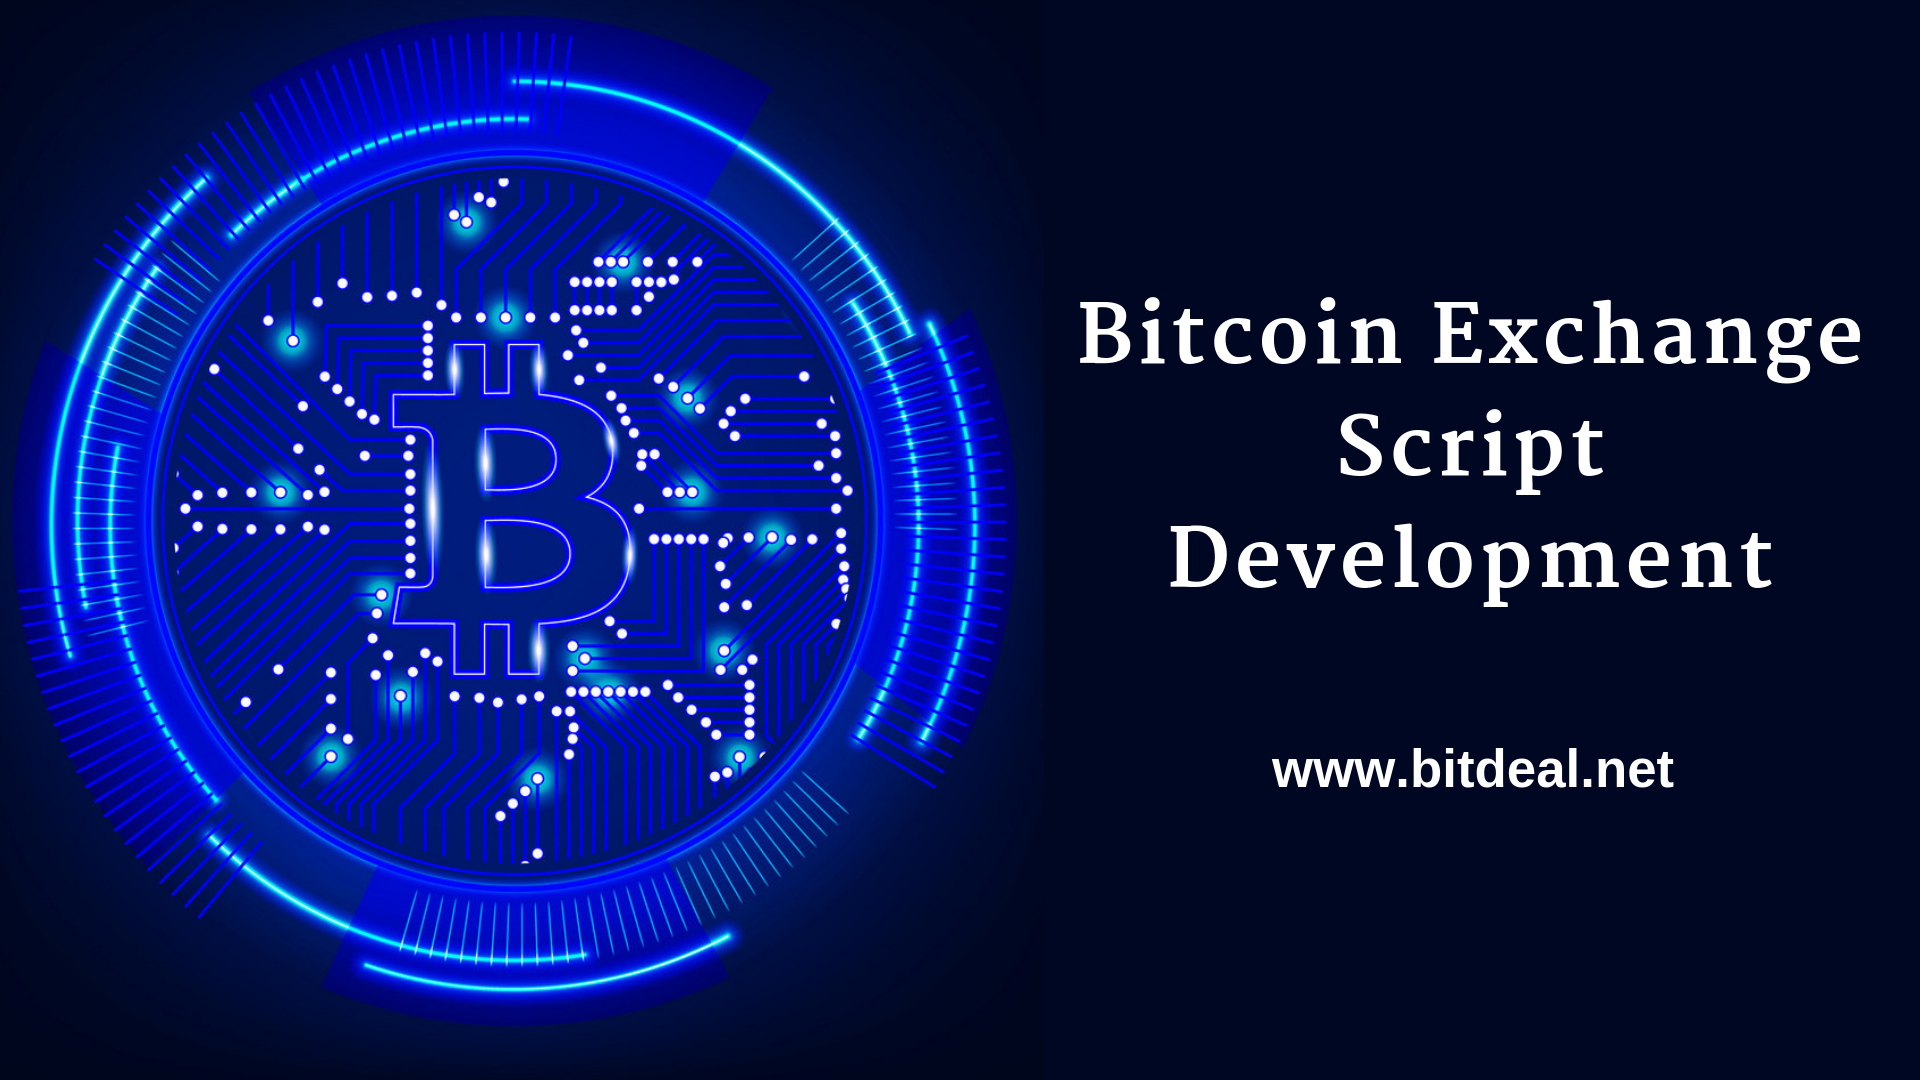 Bitcoin exchange script php to start your own bitcoin exchange businessServicesBusiness OffersAll Indiaother